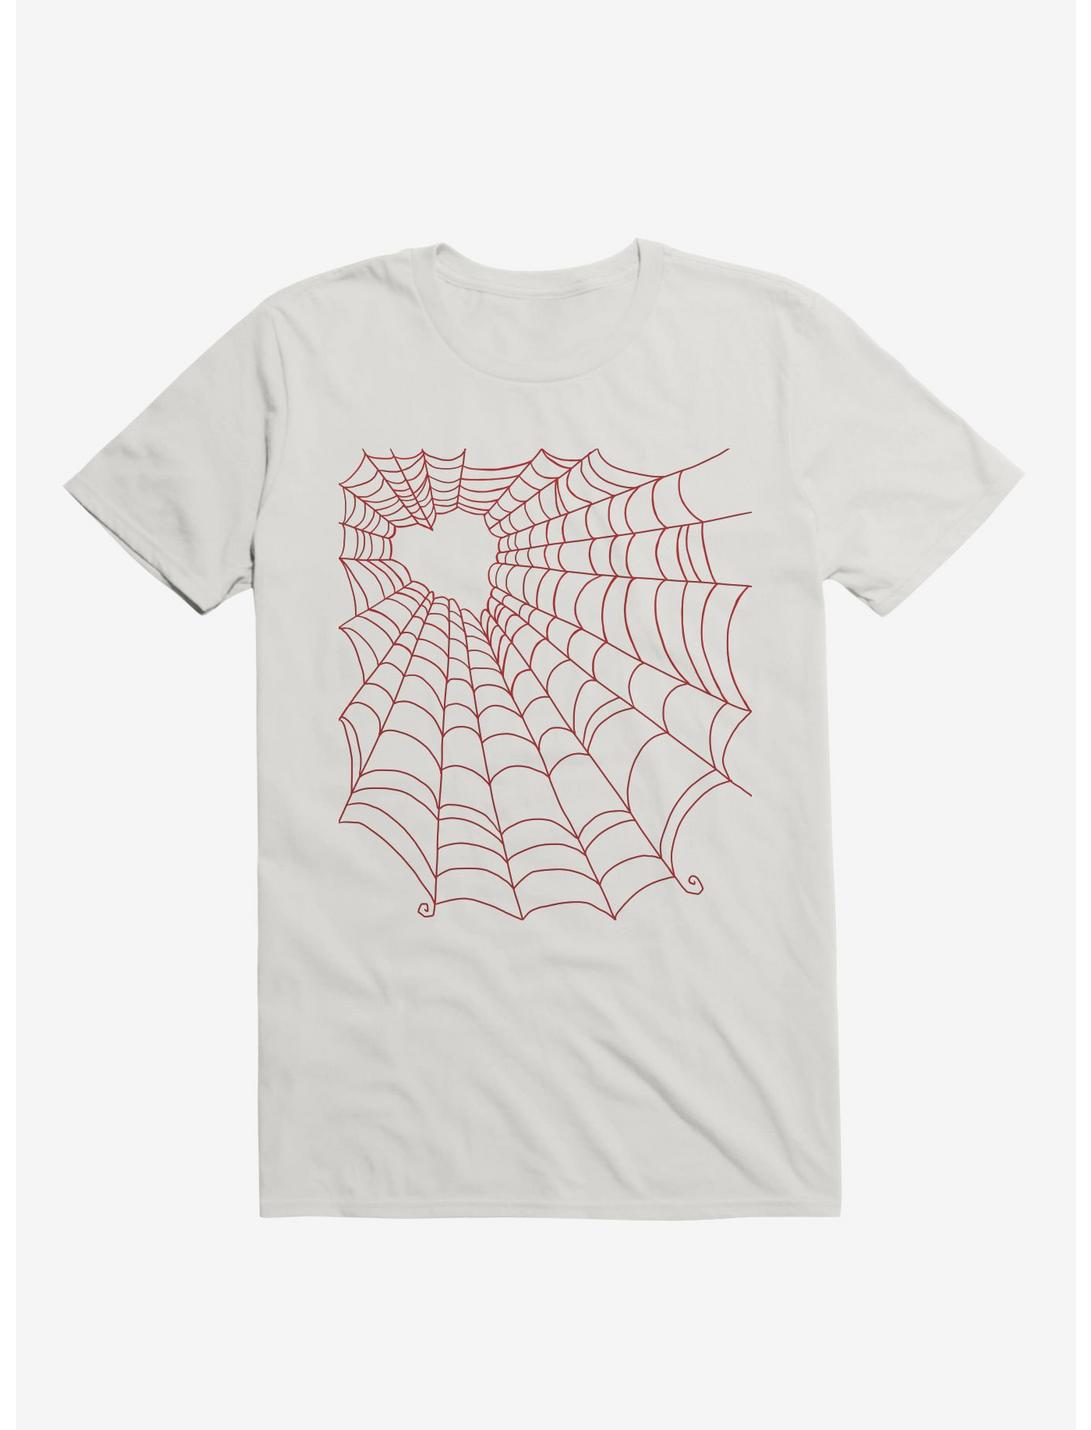 Caught You In My Red Hearted Web White T-Shirt, WHITE, hi-res